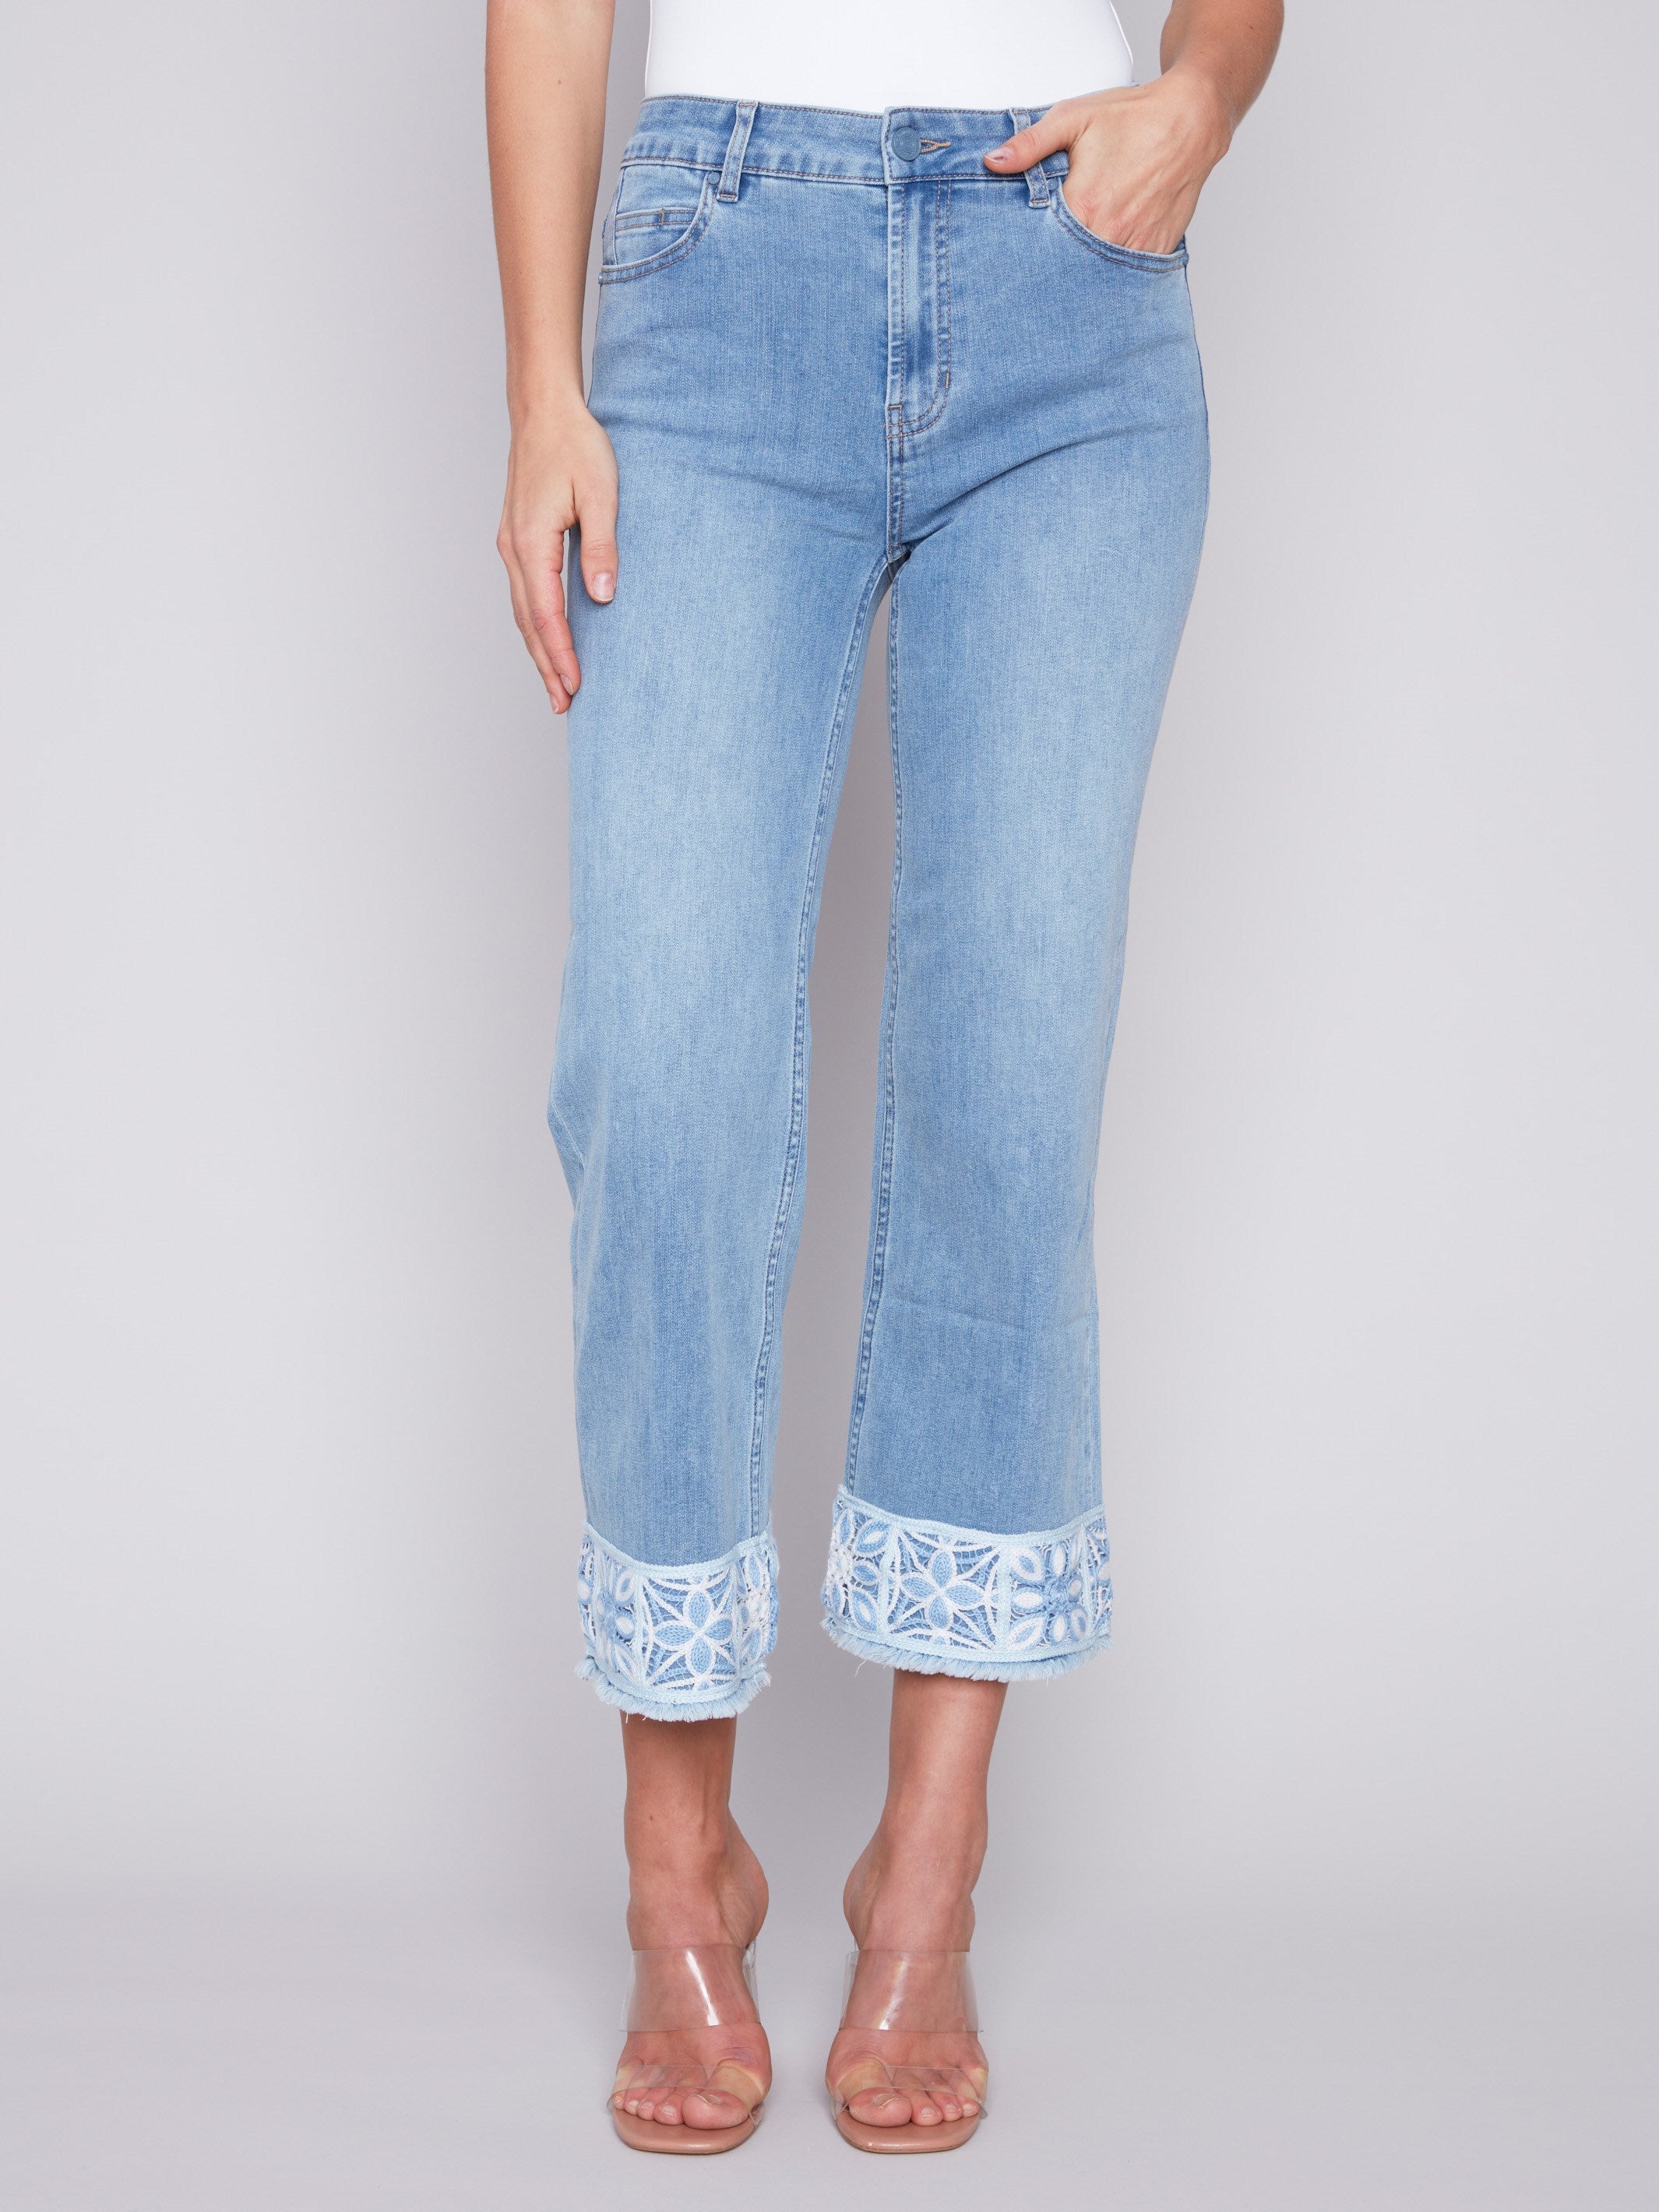 Jeans with Crochet Cuff - Light Blue - Charlie B Collection Canada - Image 2